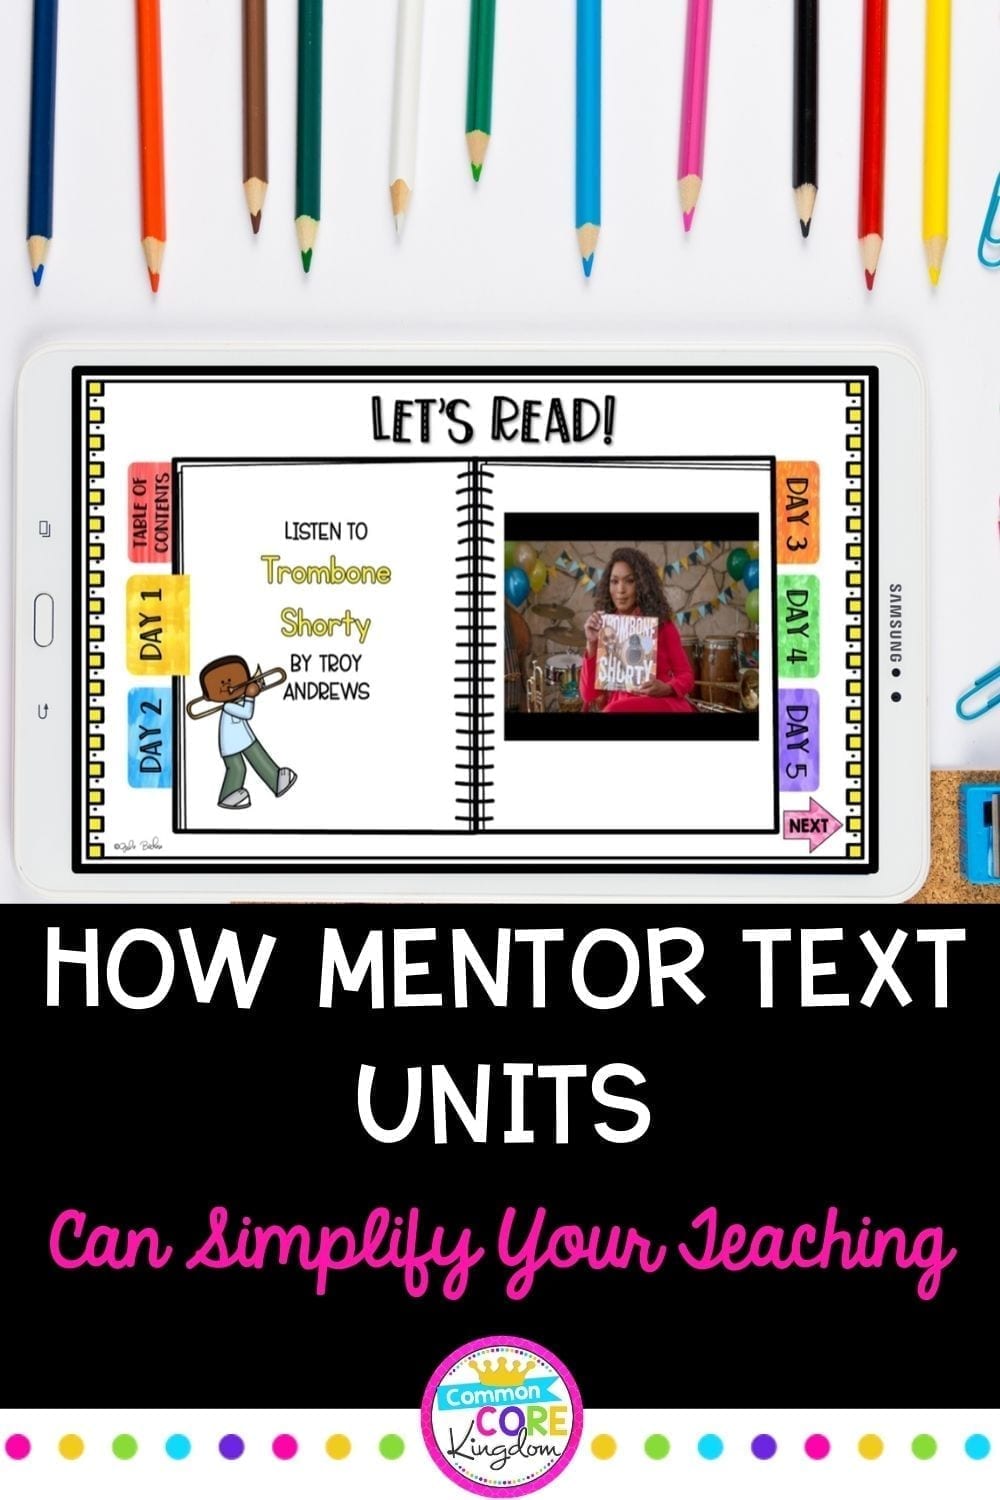 Using mentor texts units for teaching blog post cover showing book units